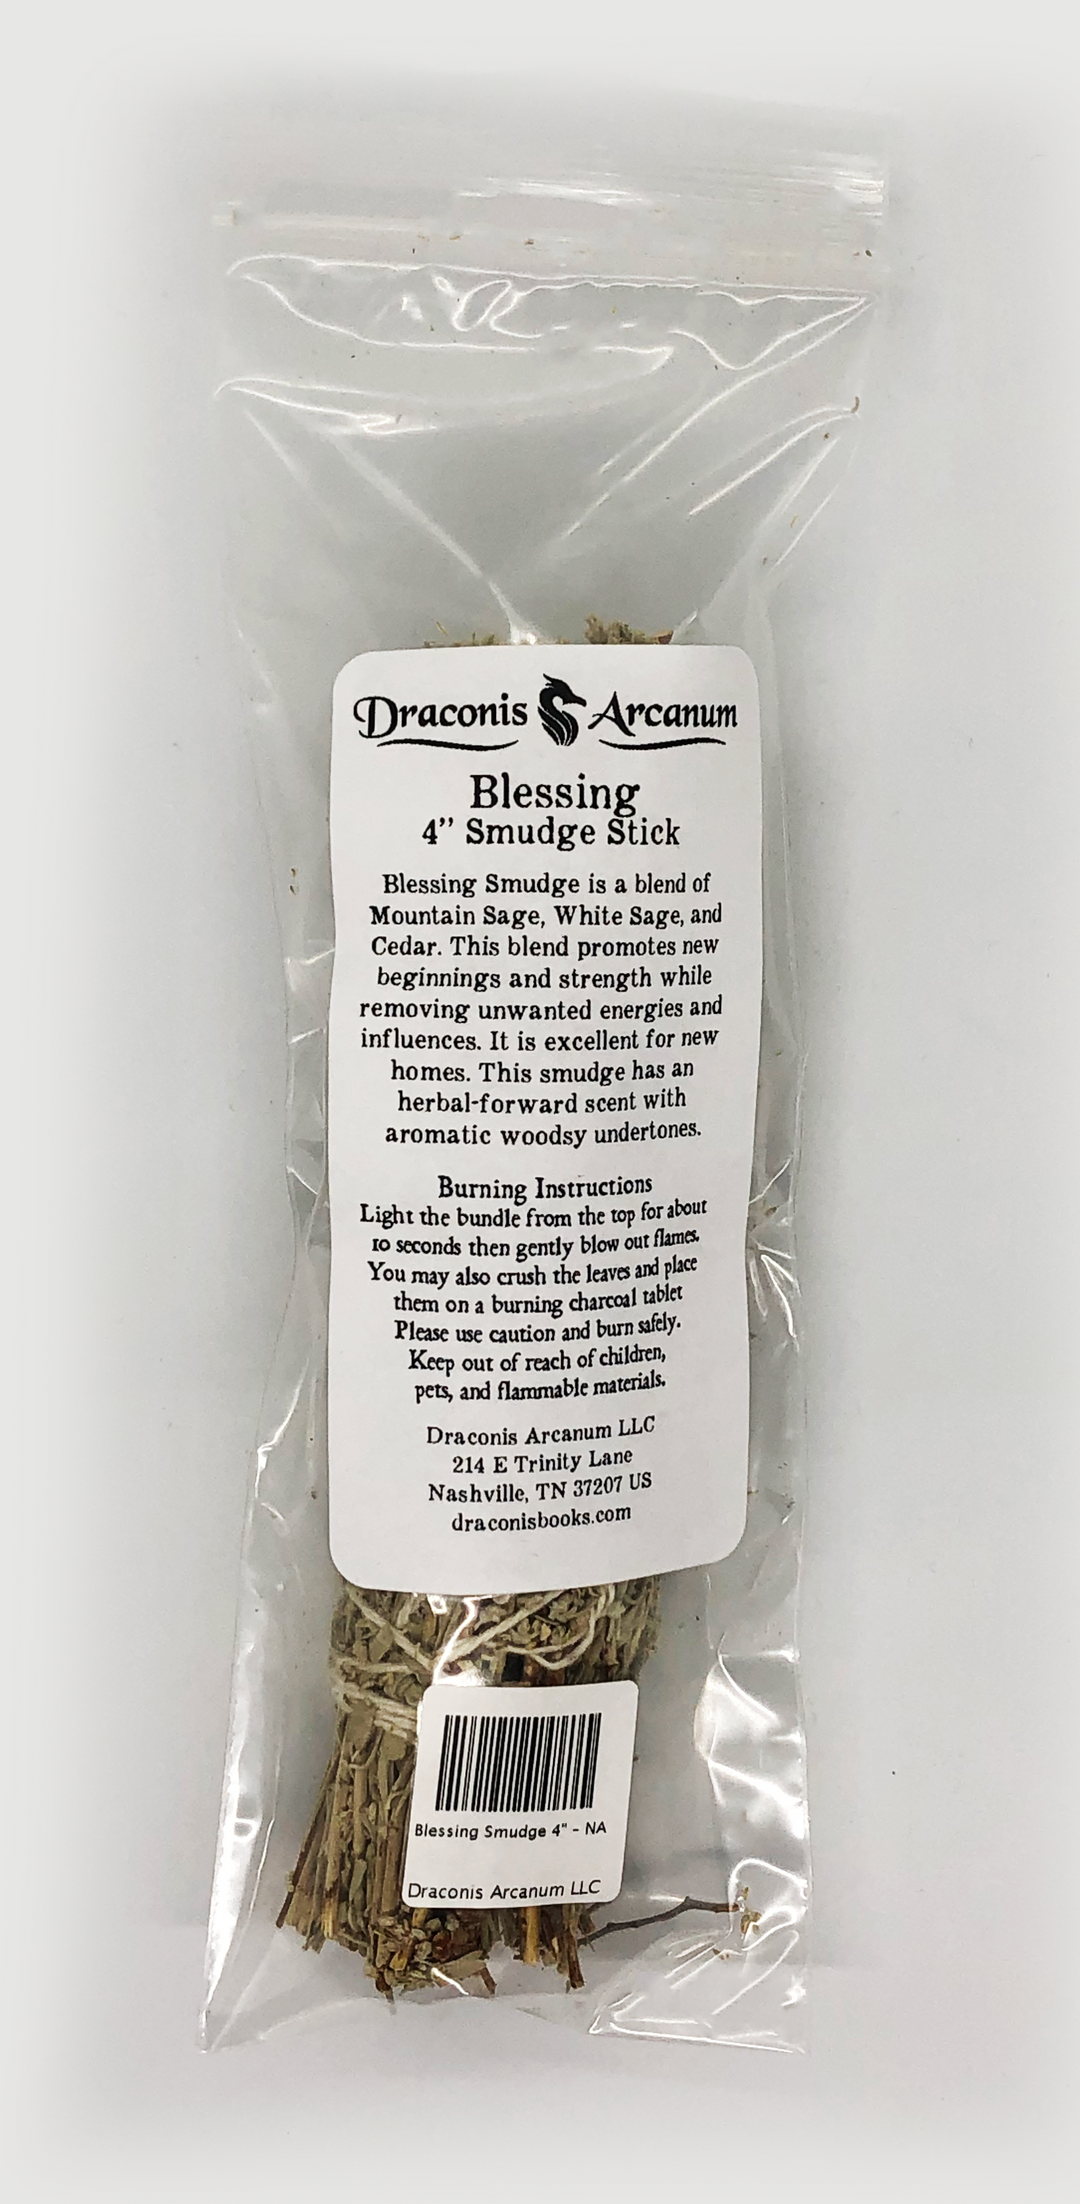 Blessing Smudge 4"